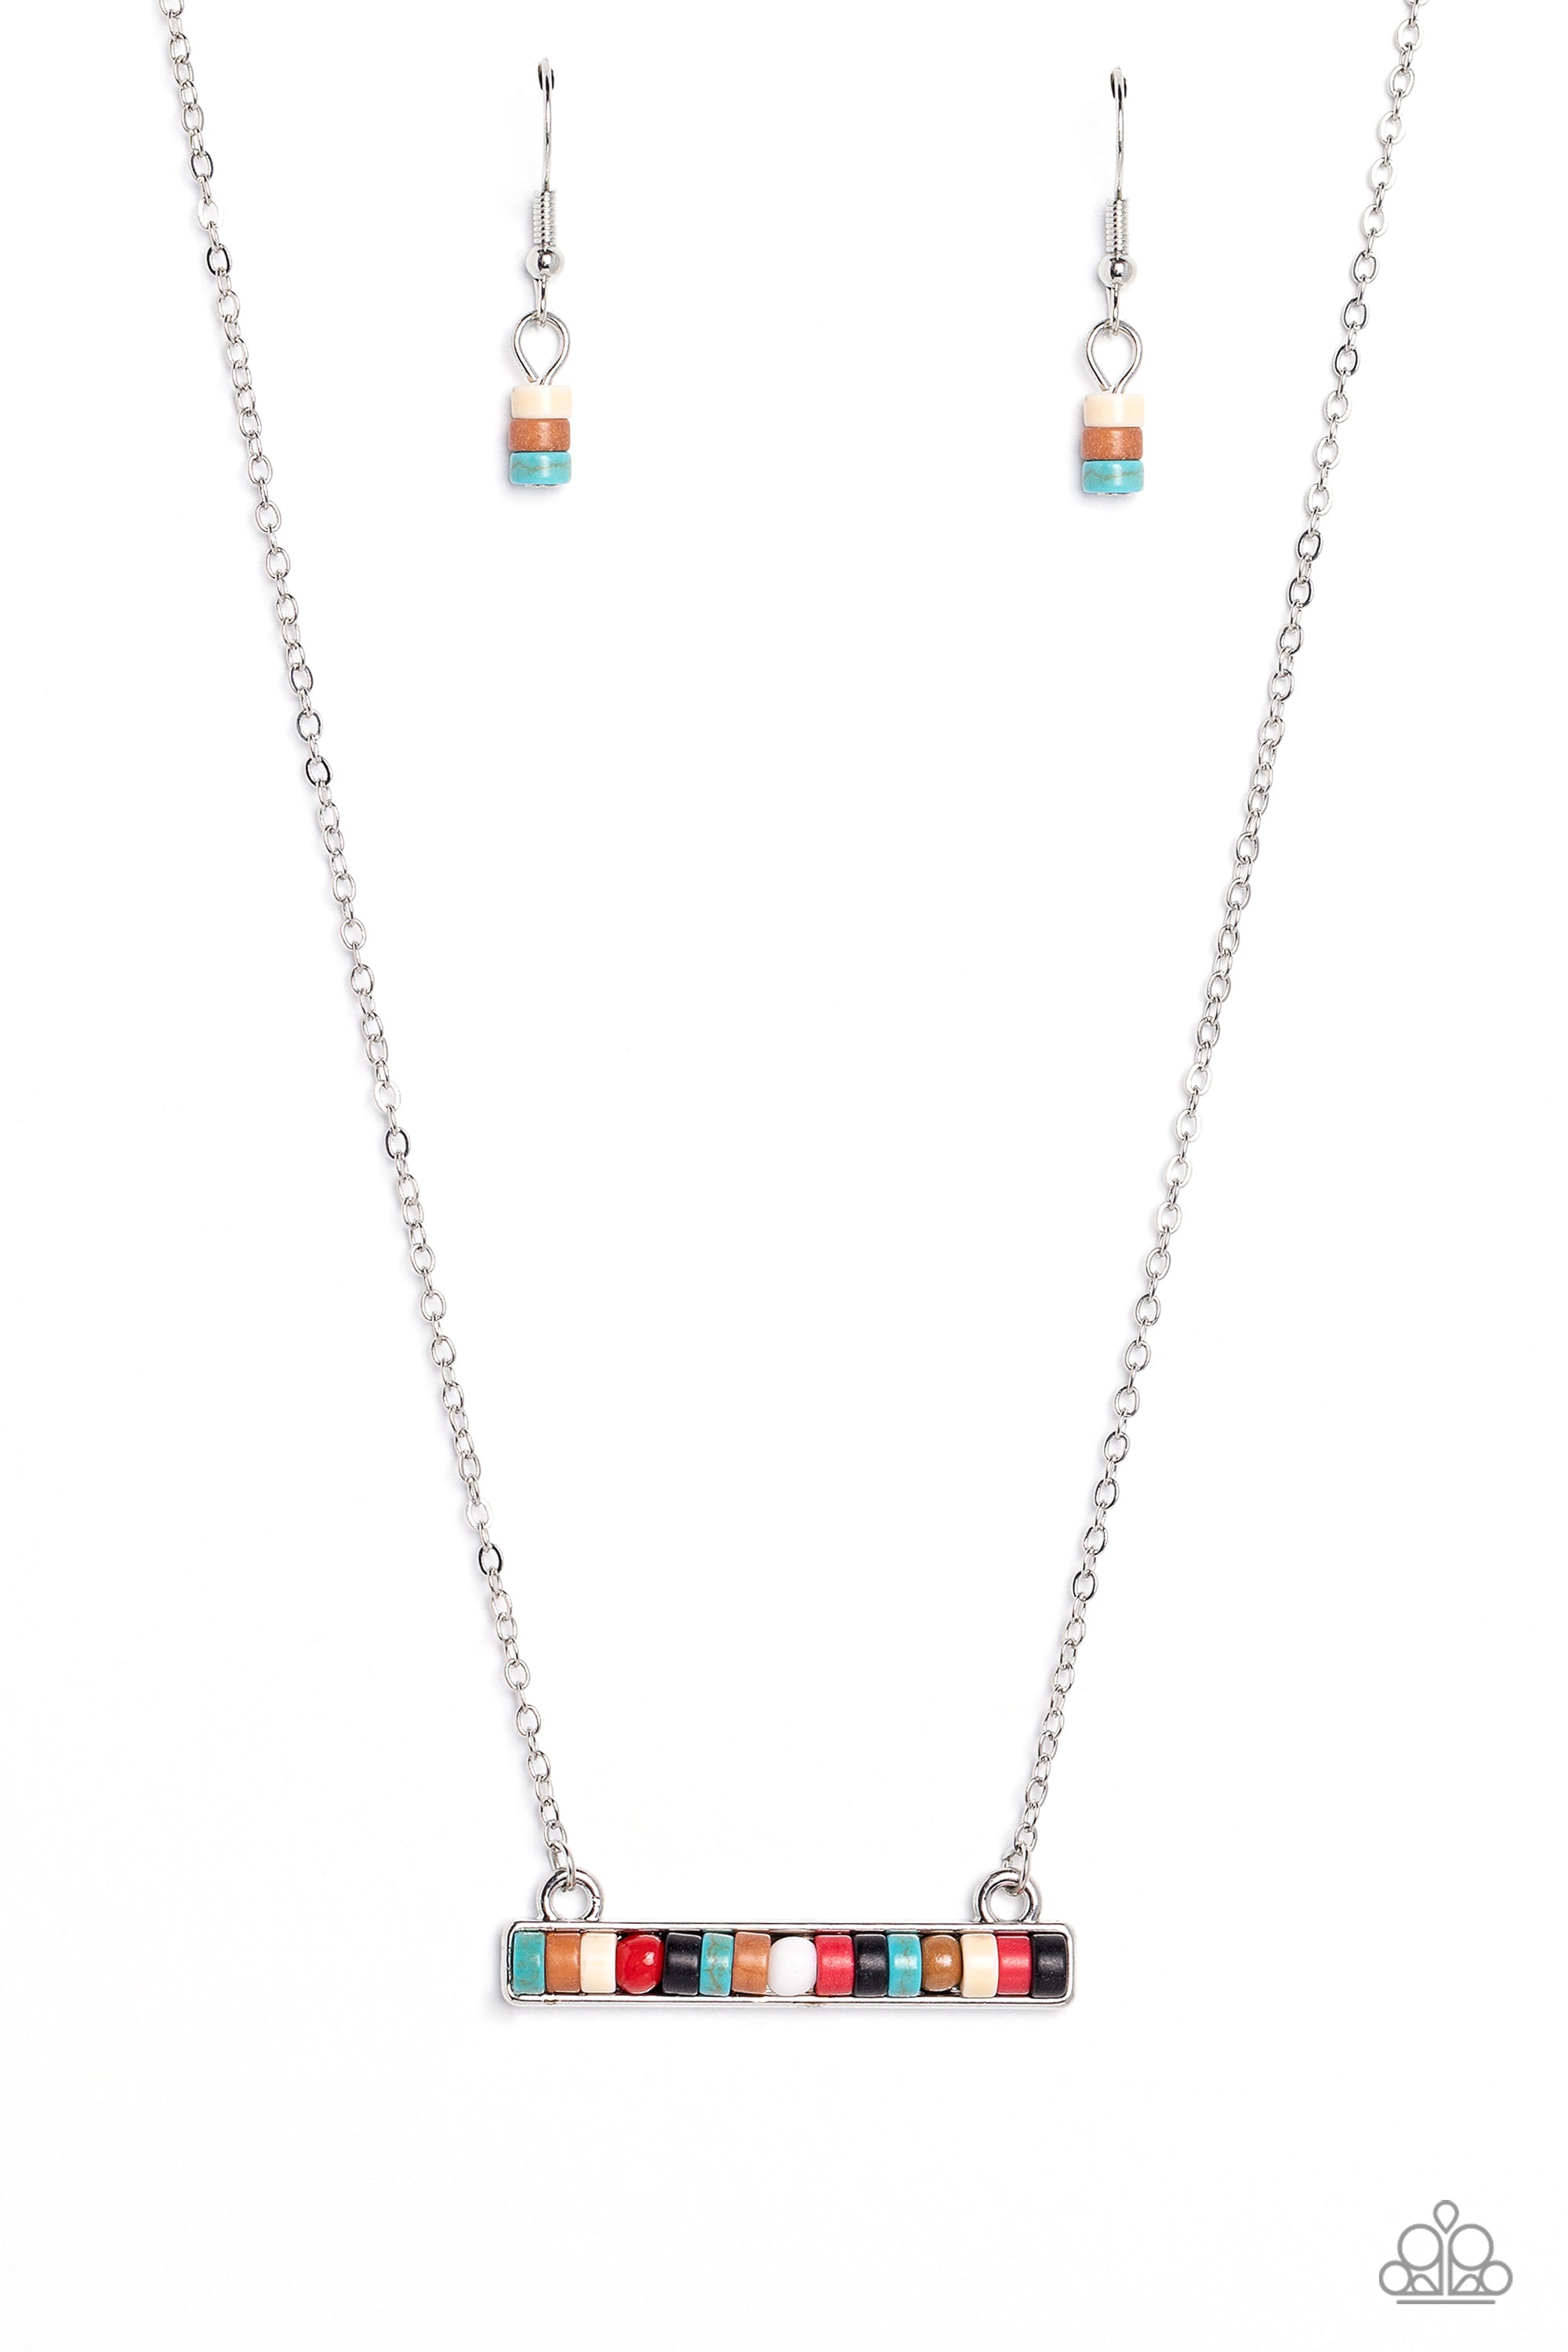 Barred Bohemian Multi Necklace - Paparazzi Accessories- lightbox - CarasShop.com - $5 Jewelry by Cara Jewels